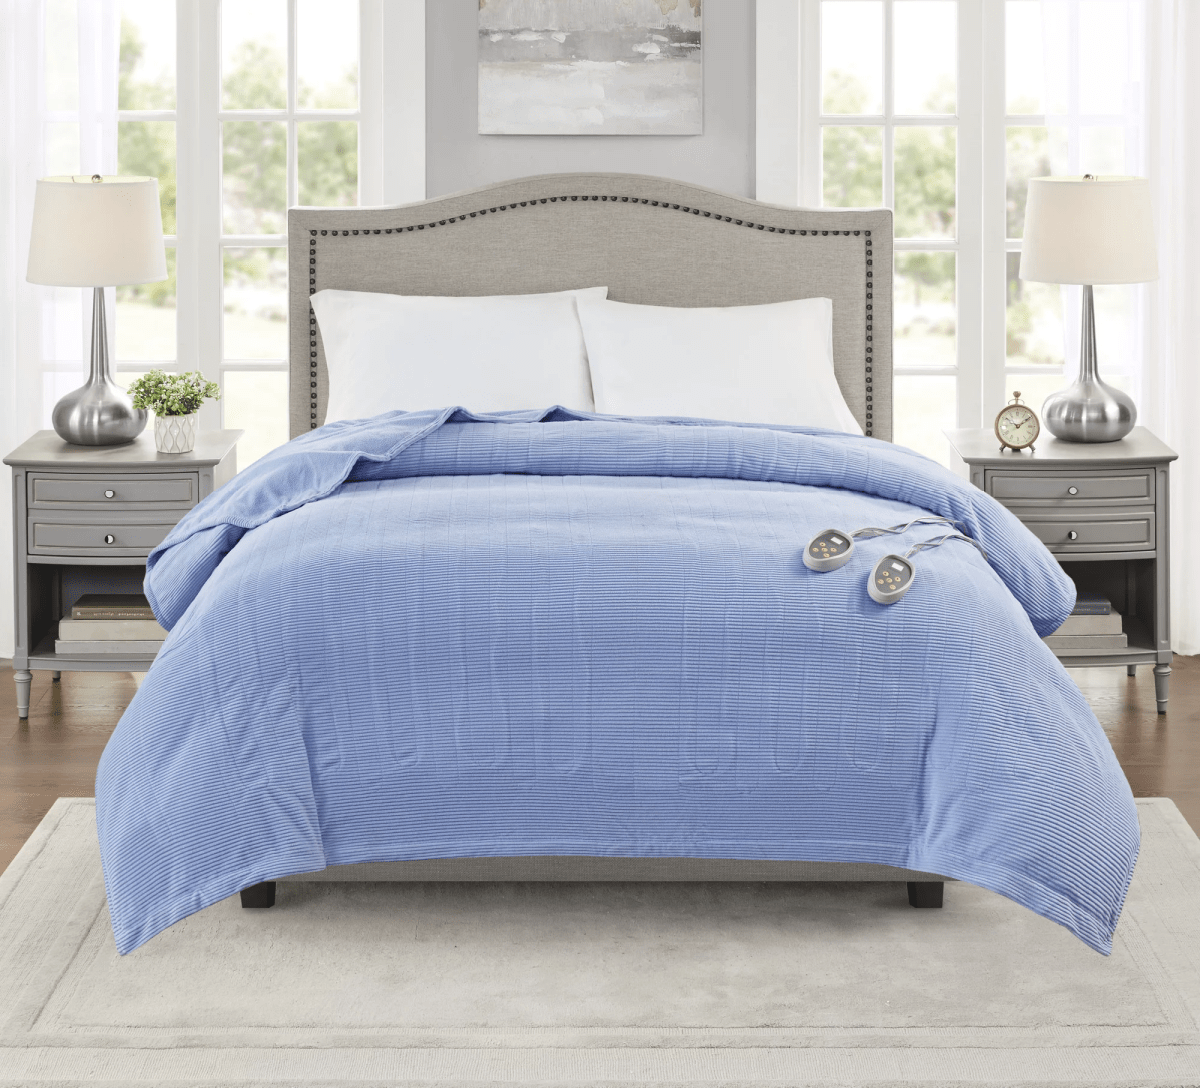 A blue blanket draped over a bed